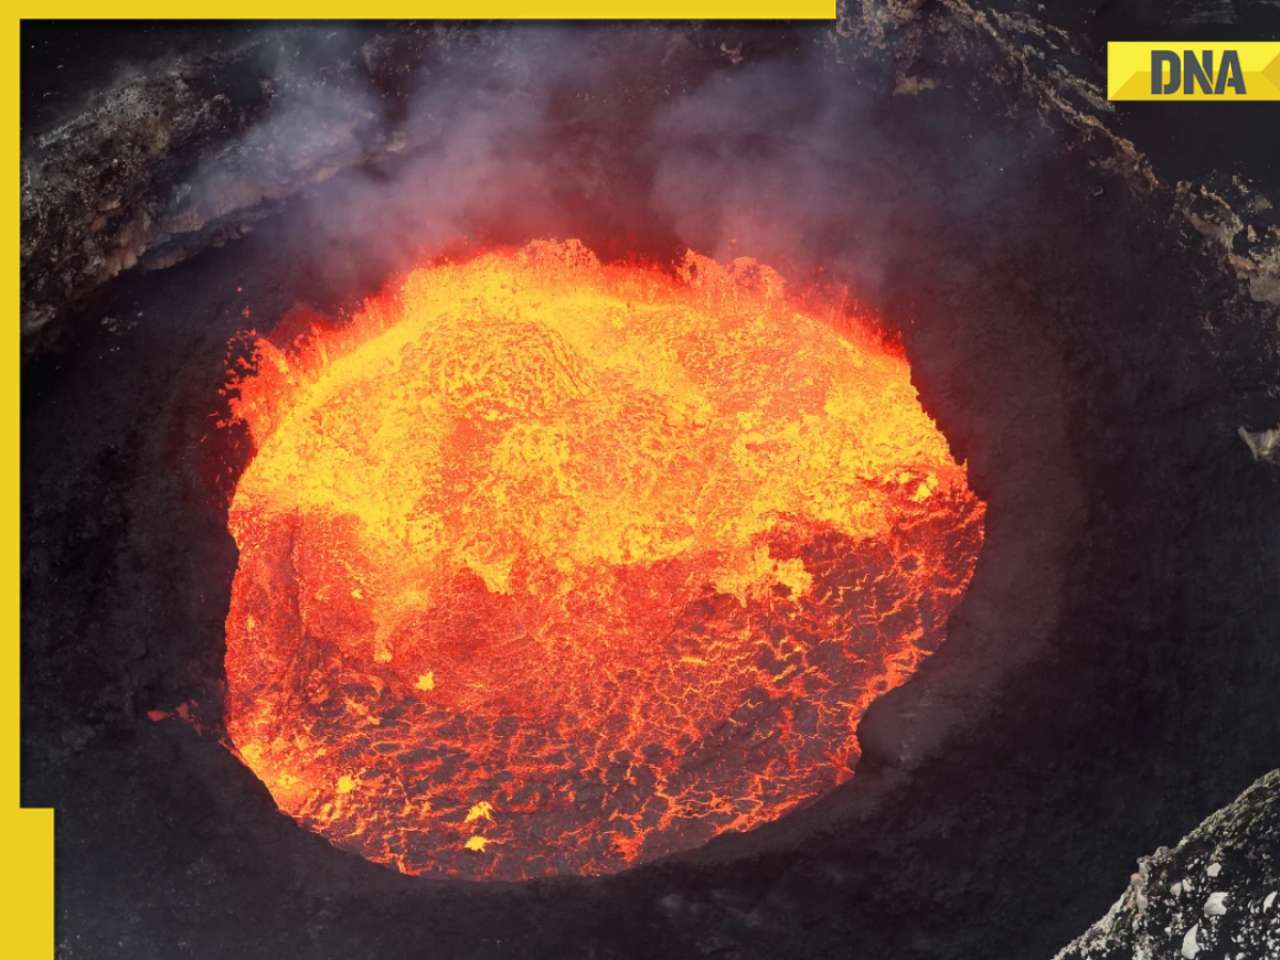 Woman falls into volcano while posing for photos, details here